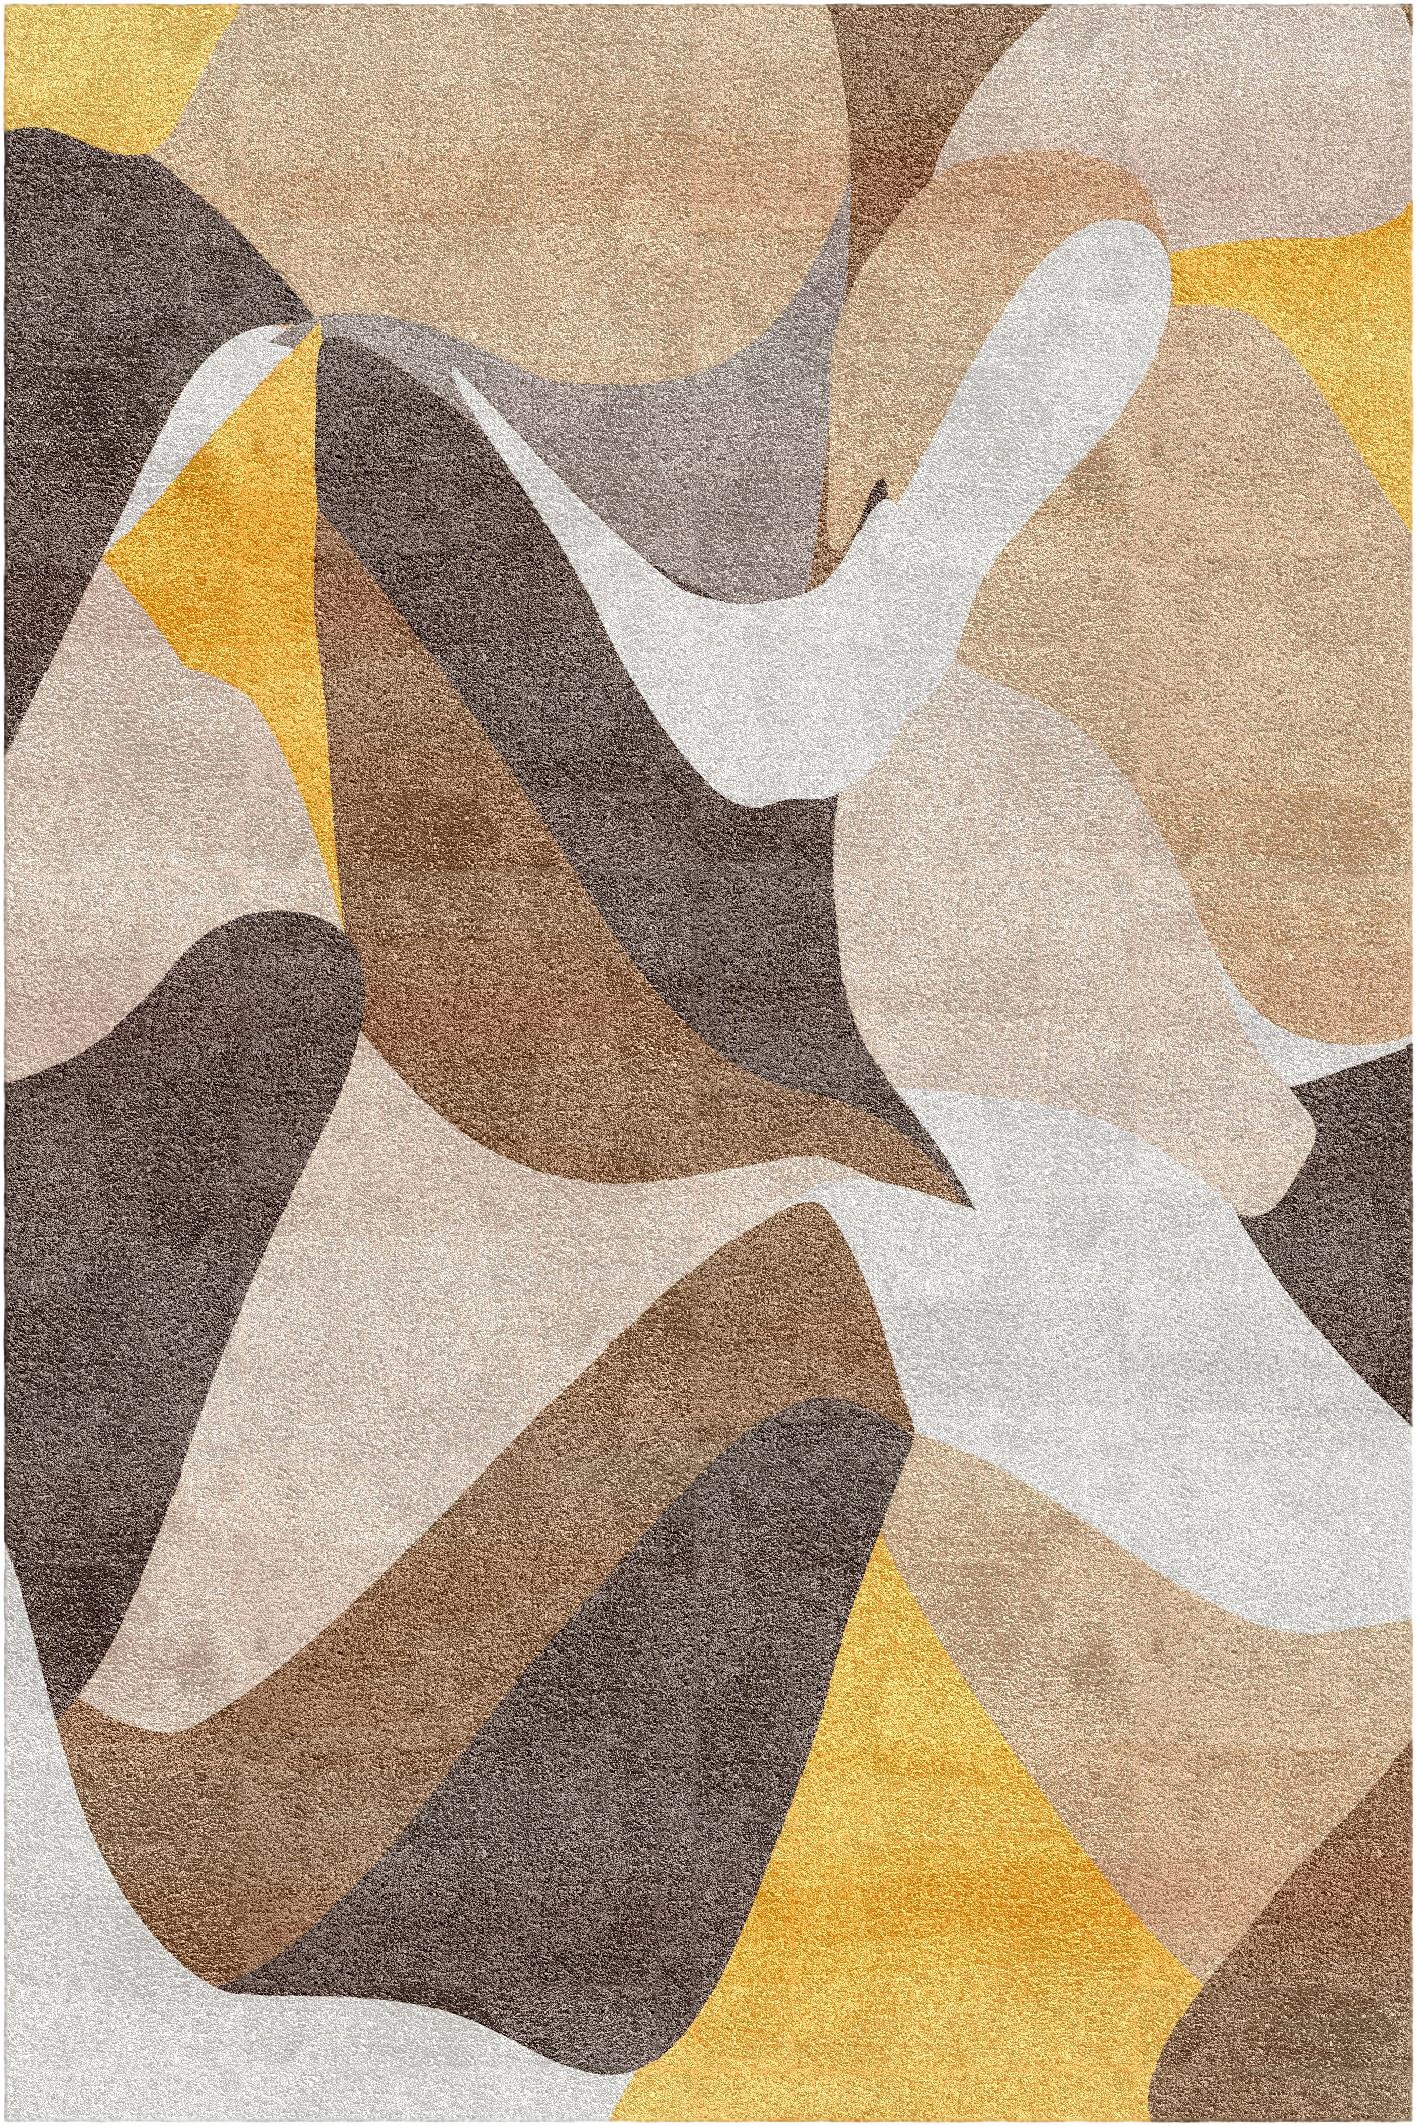 Dune rug I by Vanessa Ordoñez
Dimensions: D 300 x W 200 x H 1.5 cm
Materials: bamboo fibers and linen

A stunning collaboration of Vanessa Ordonez with Malcusa, this rug is part of a series inspired by the designer’s intimate connection with